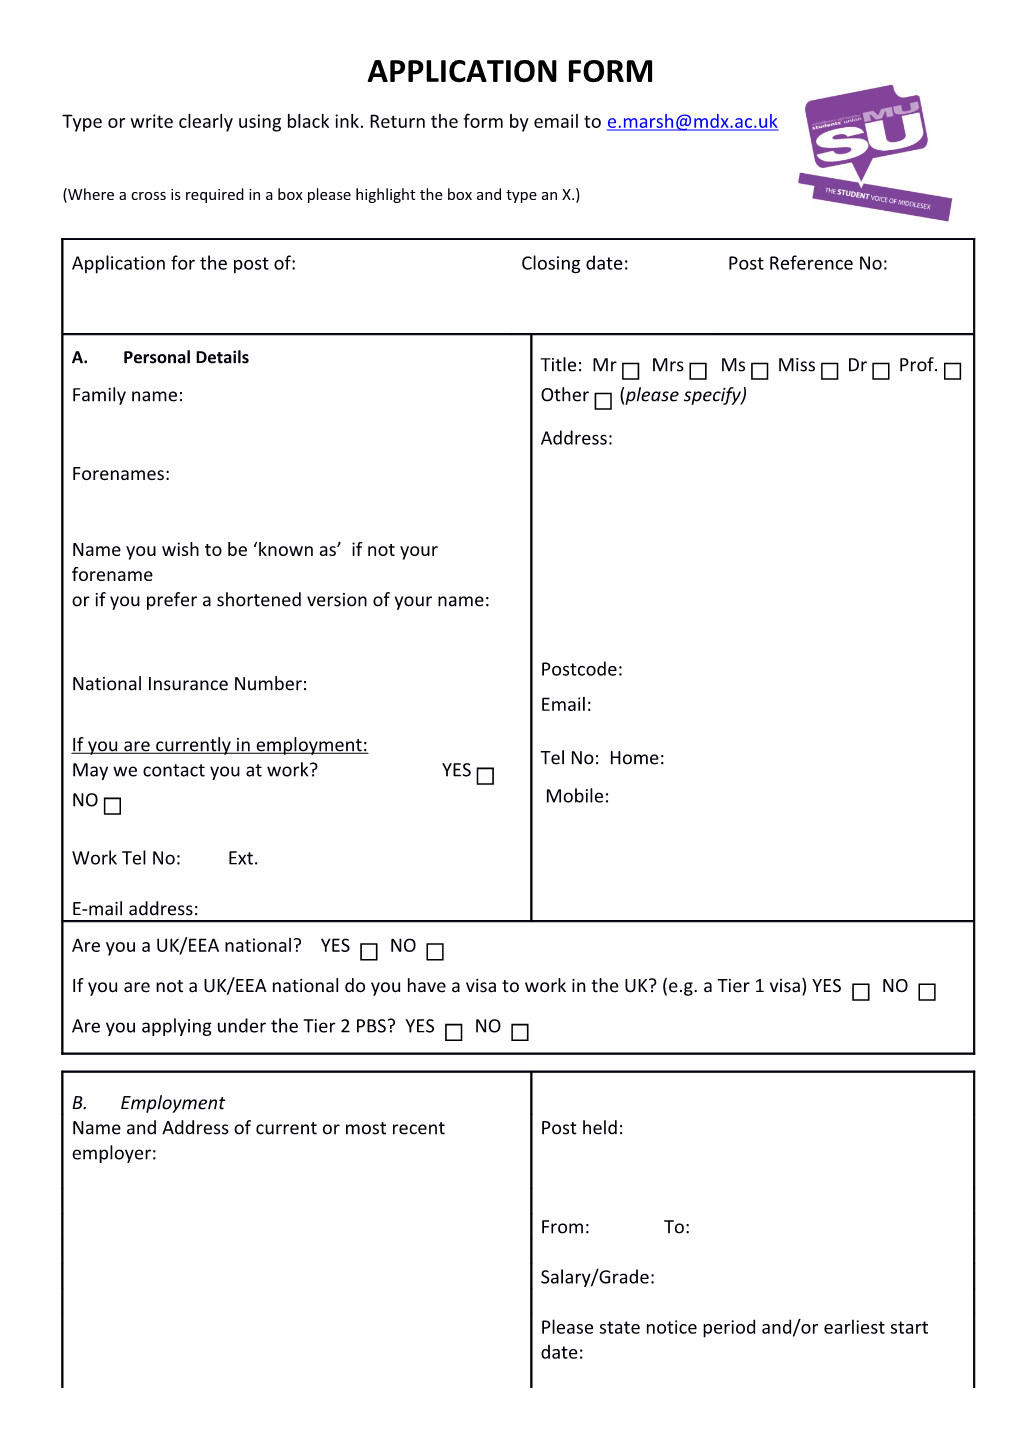 Type Or Write Clearly Using Black Ink. Return the Form by Email To